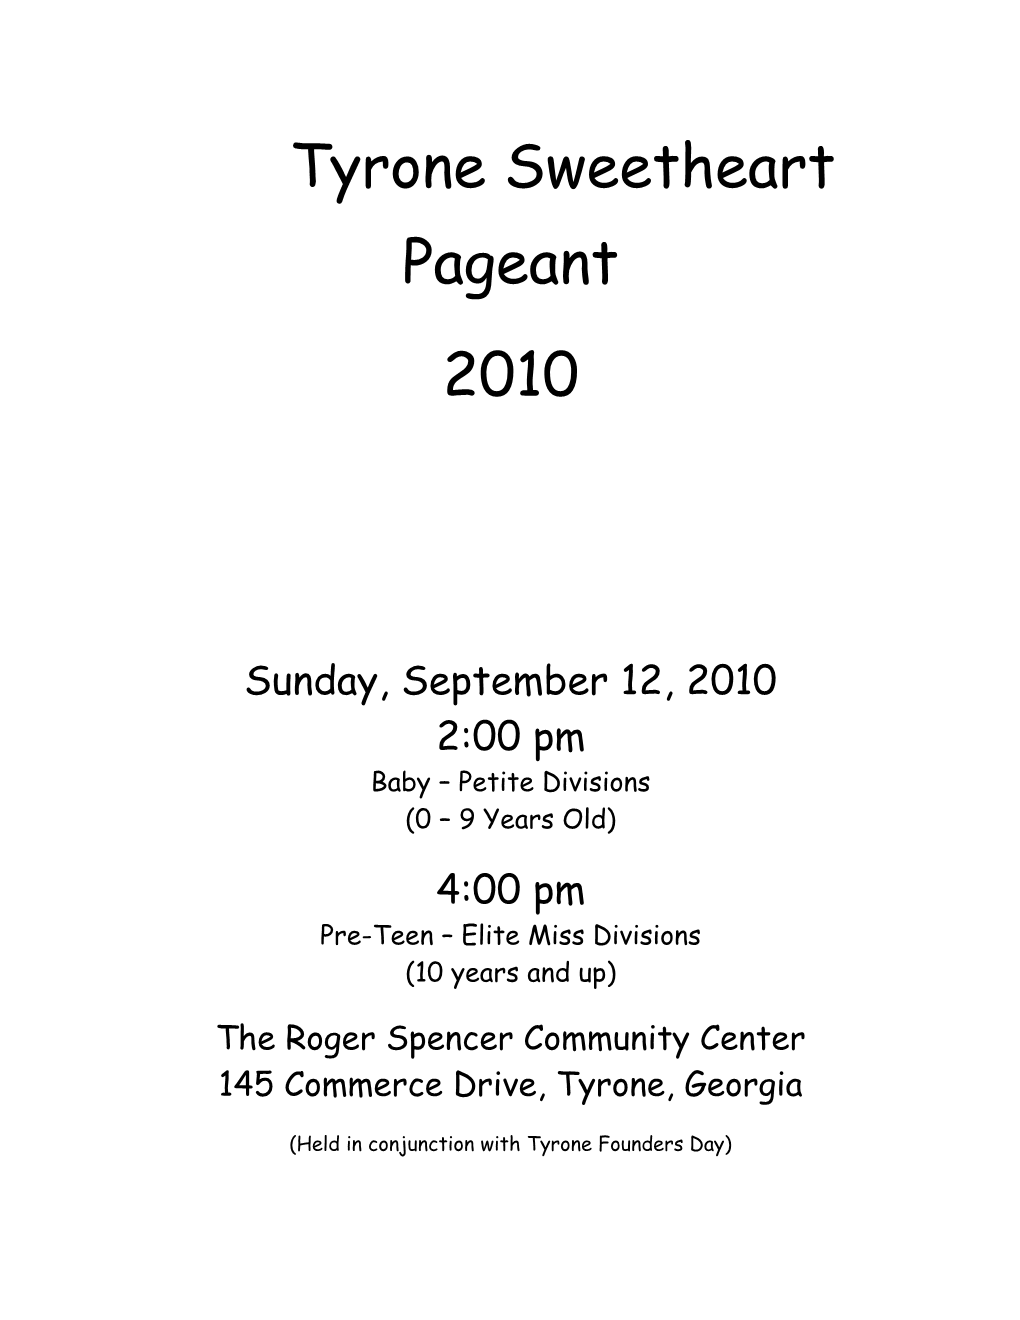 Tyrone Sweetheart Pageant